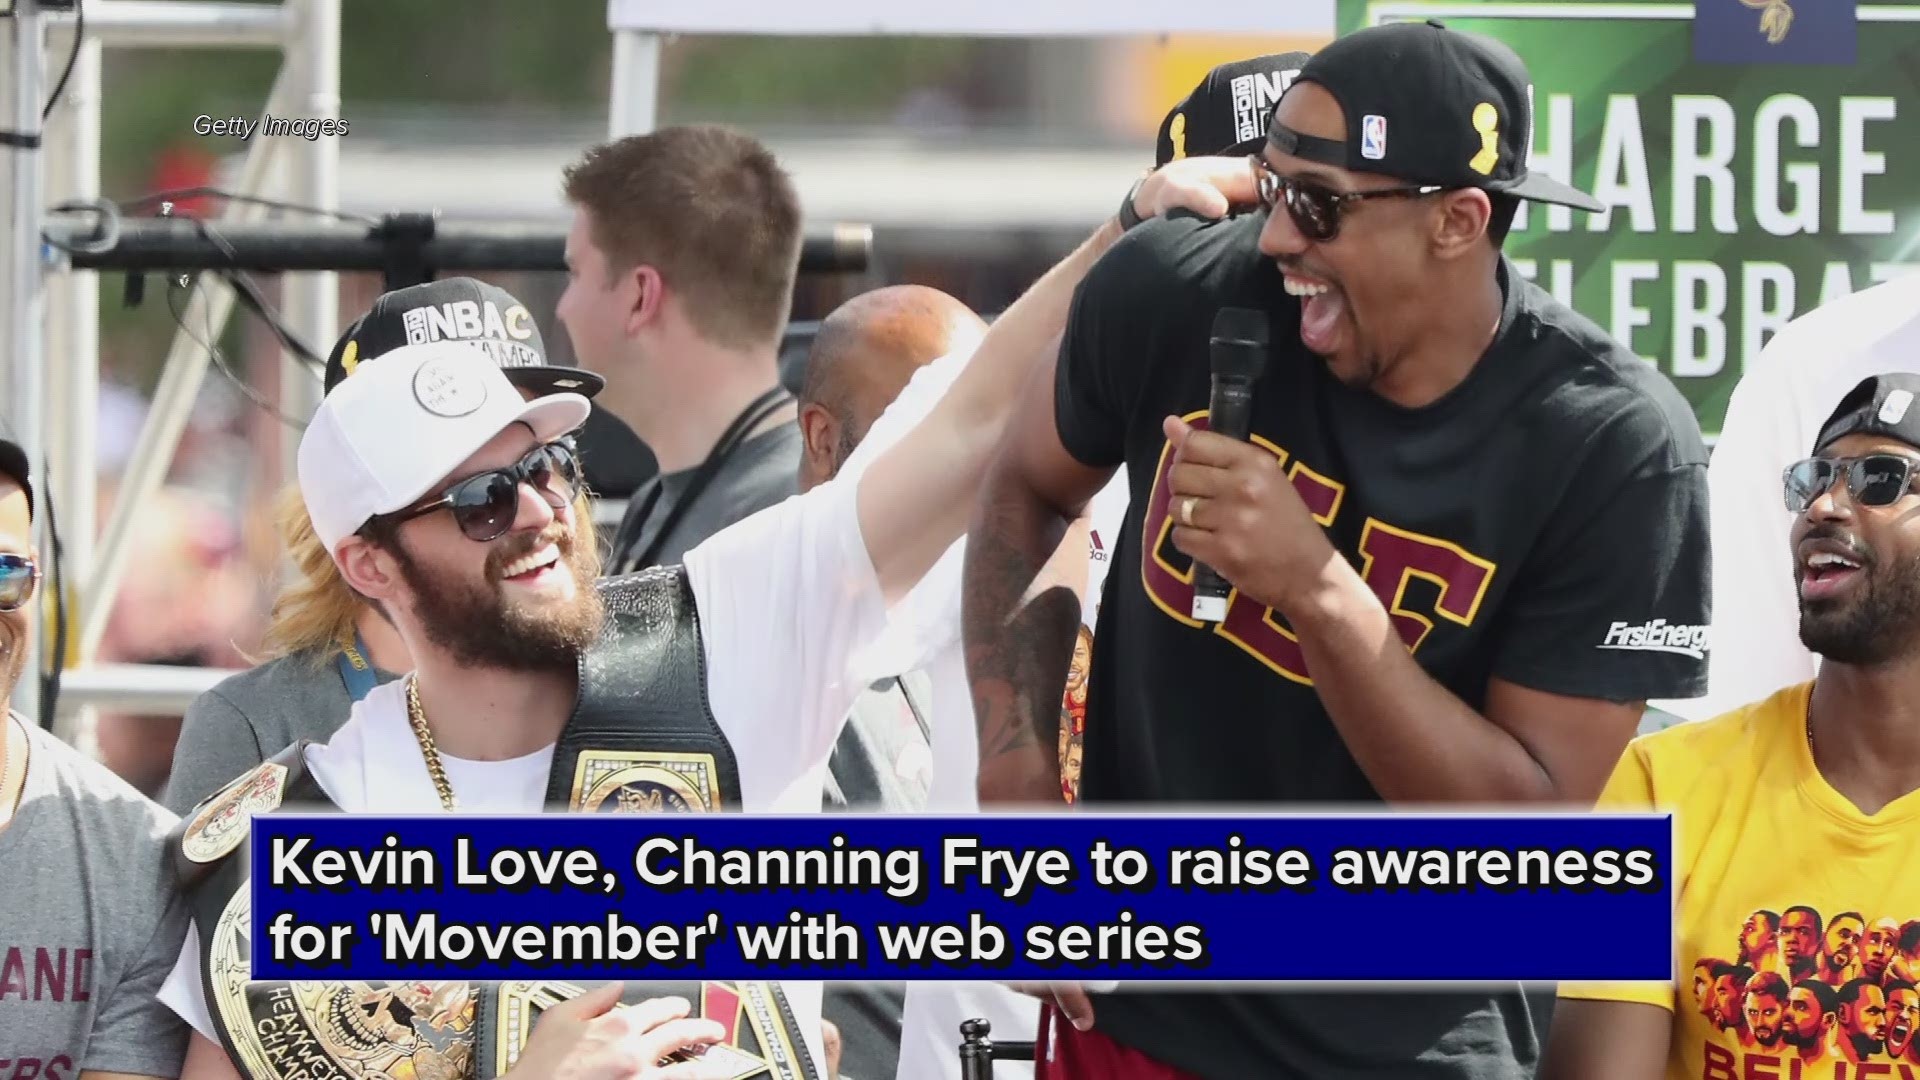 Cleveland Cavaliers F Kevin Love, Channing Frye to raise awareness for 'Movember' with web series